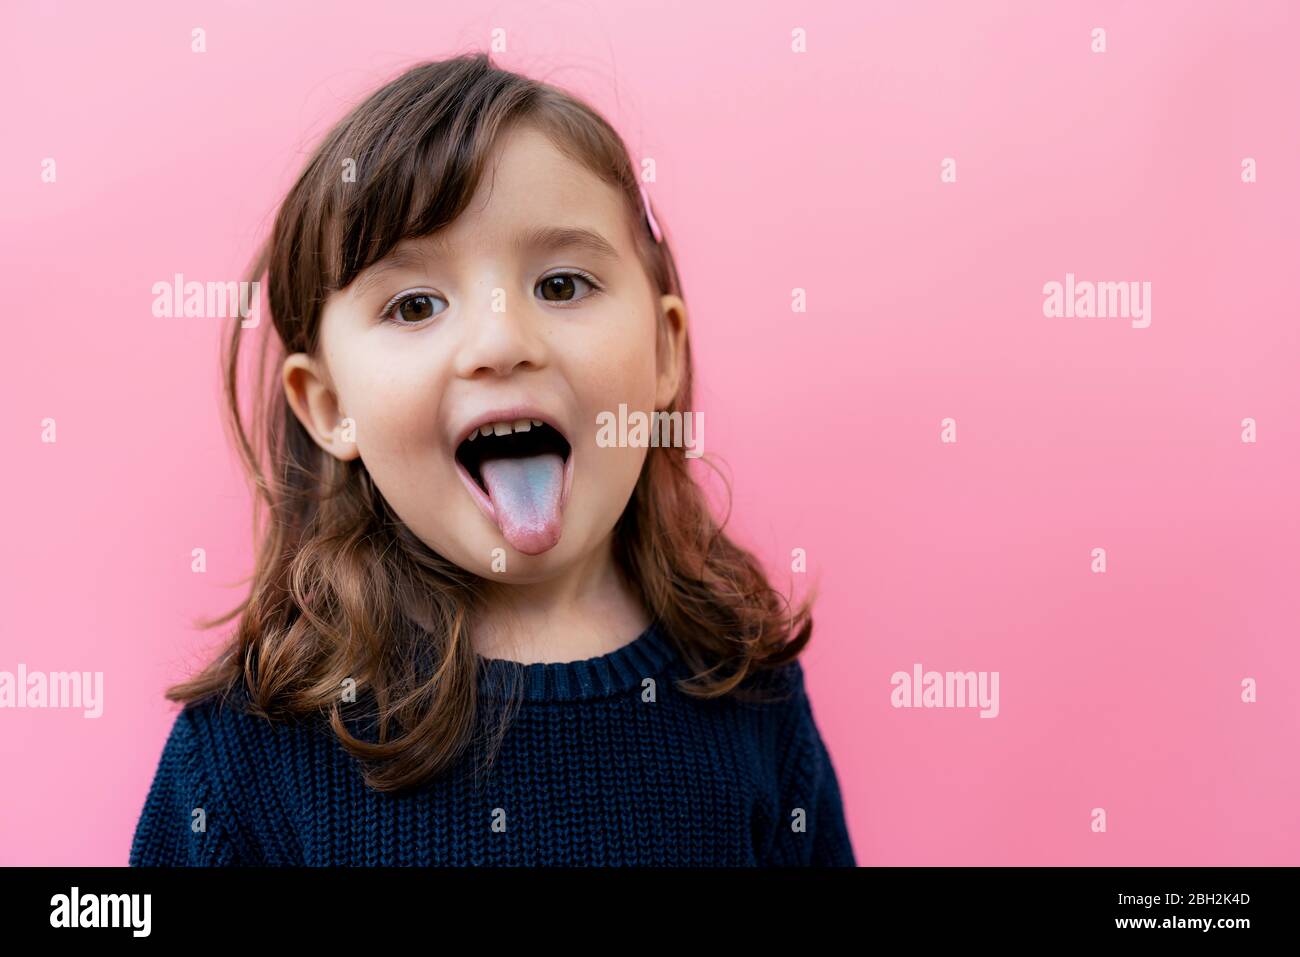 Portrait of little girl sticking out blue tongue in front of pink background Stock Photo